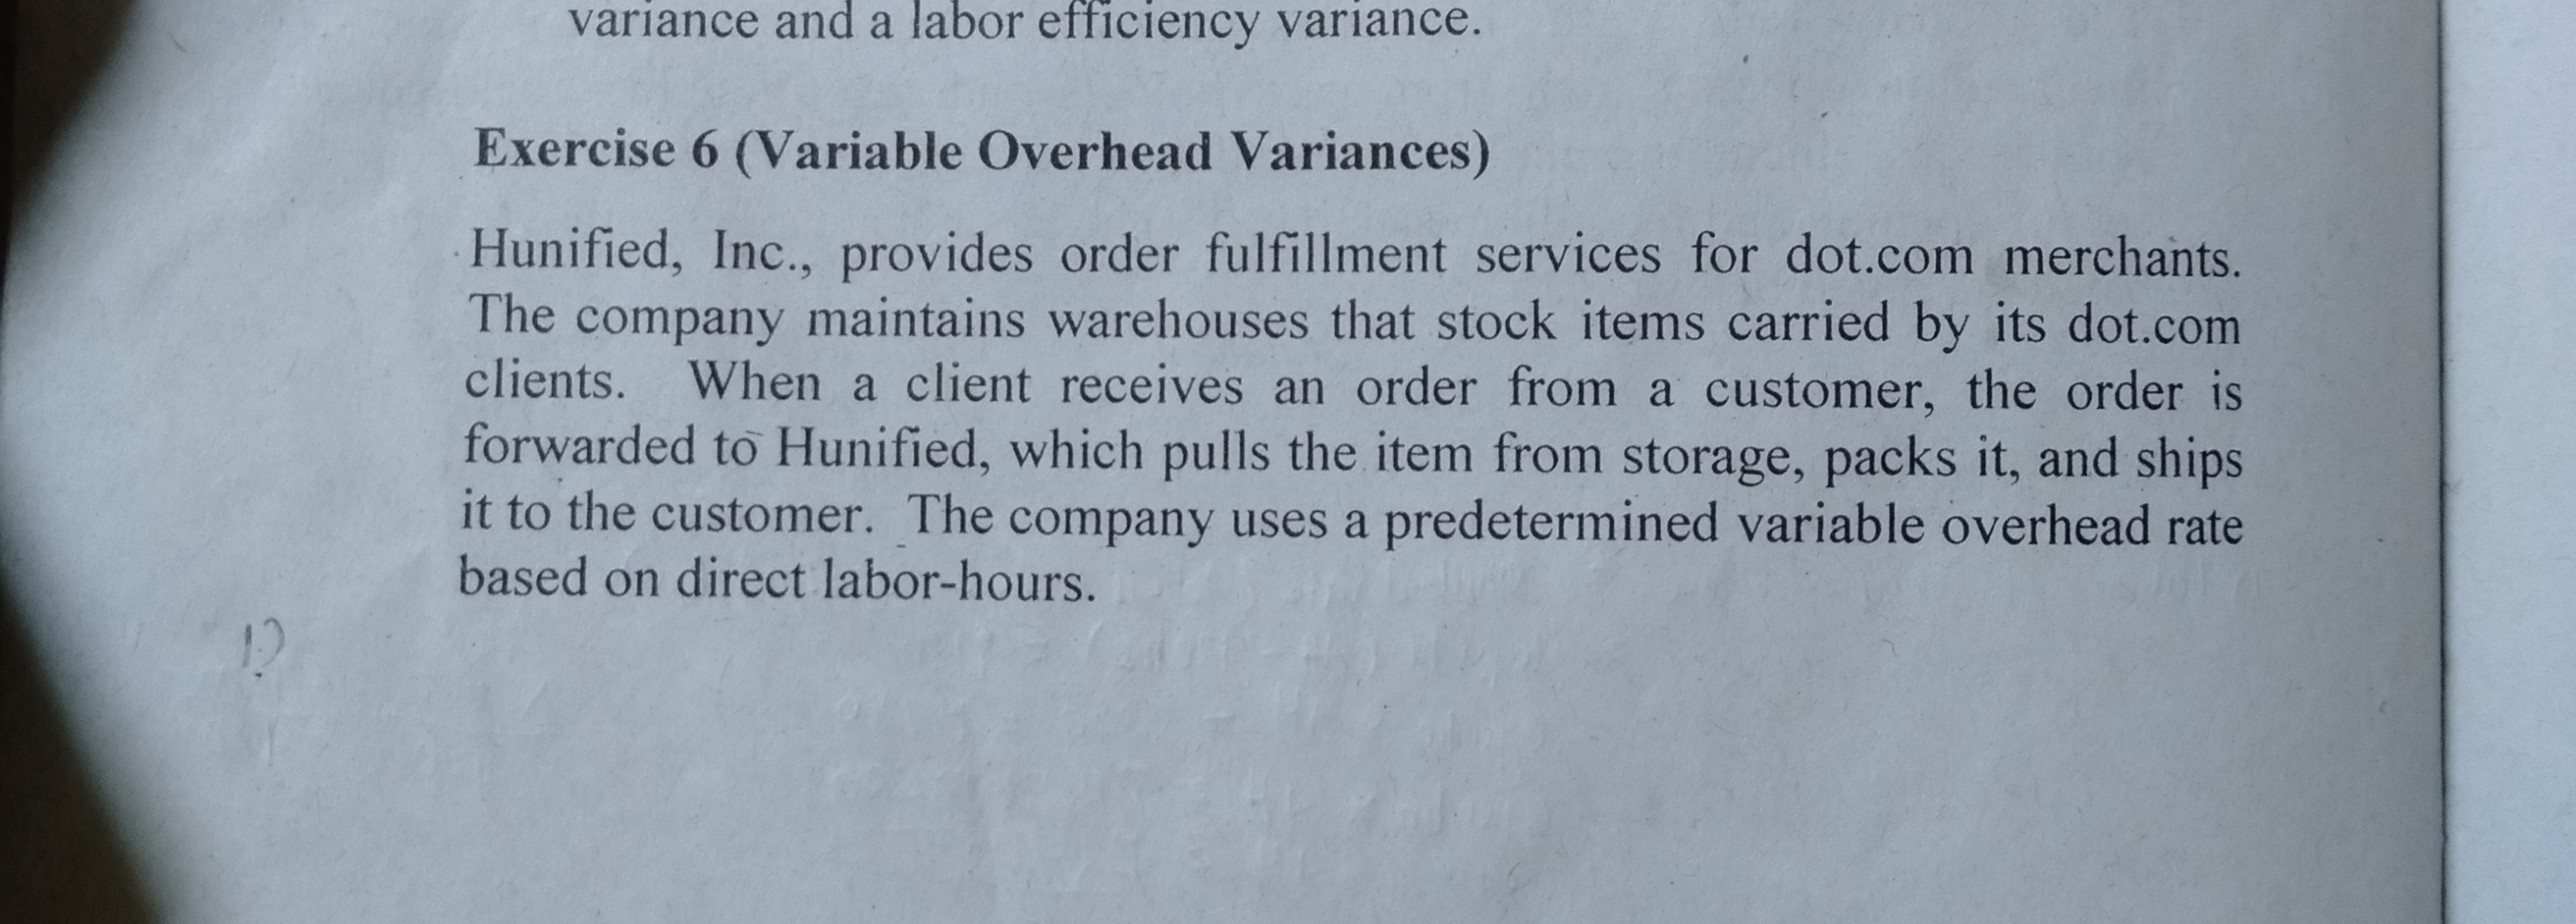 variance and a labor efficiency variance.
Exercise 6 (Variable Overhead Variances)
Hunified, Inc., provides order fulfillment services for dot.com merchants.
The company maintains warehouses that stock items carried by its dot.com
clients. When a client receives an order from a customer, the order is
forwarded to Hunified, which pulls the item from storage, packs it, and ships
it to the customer. The company uses a predetermined variable overhead rate
based on direct labor-hours.
